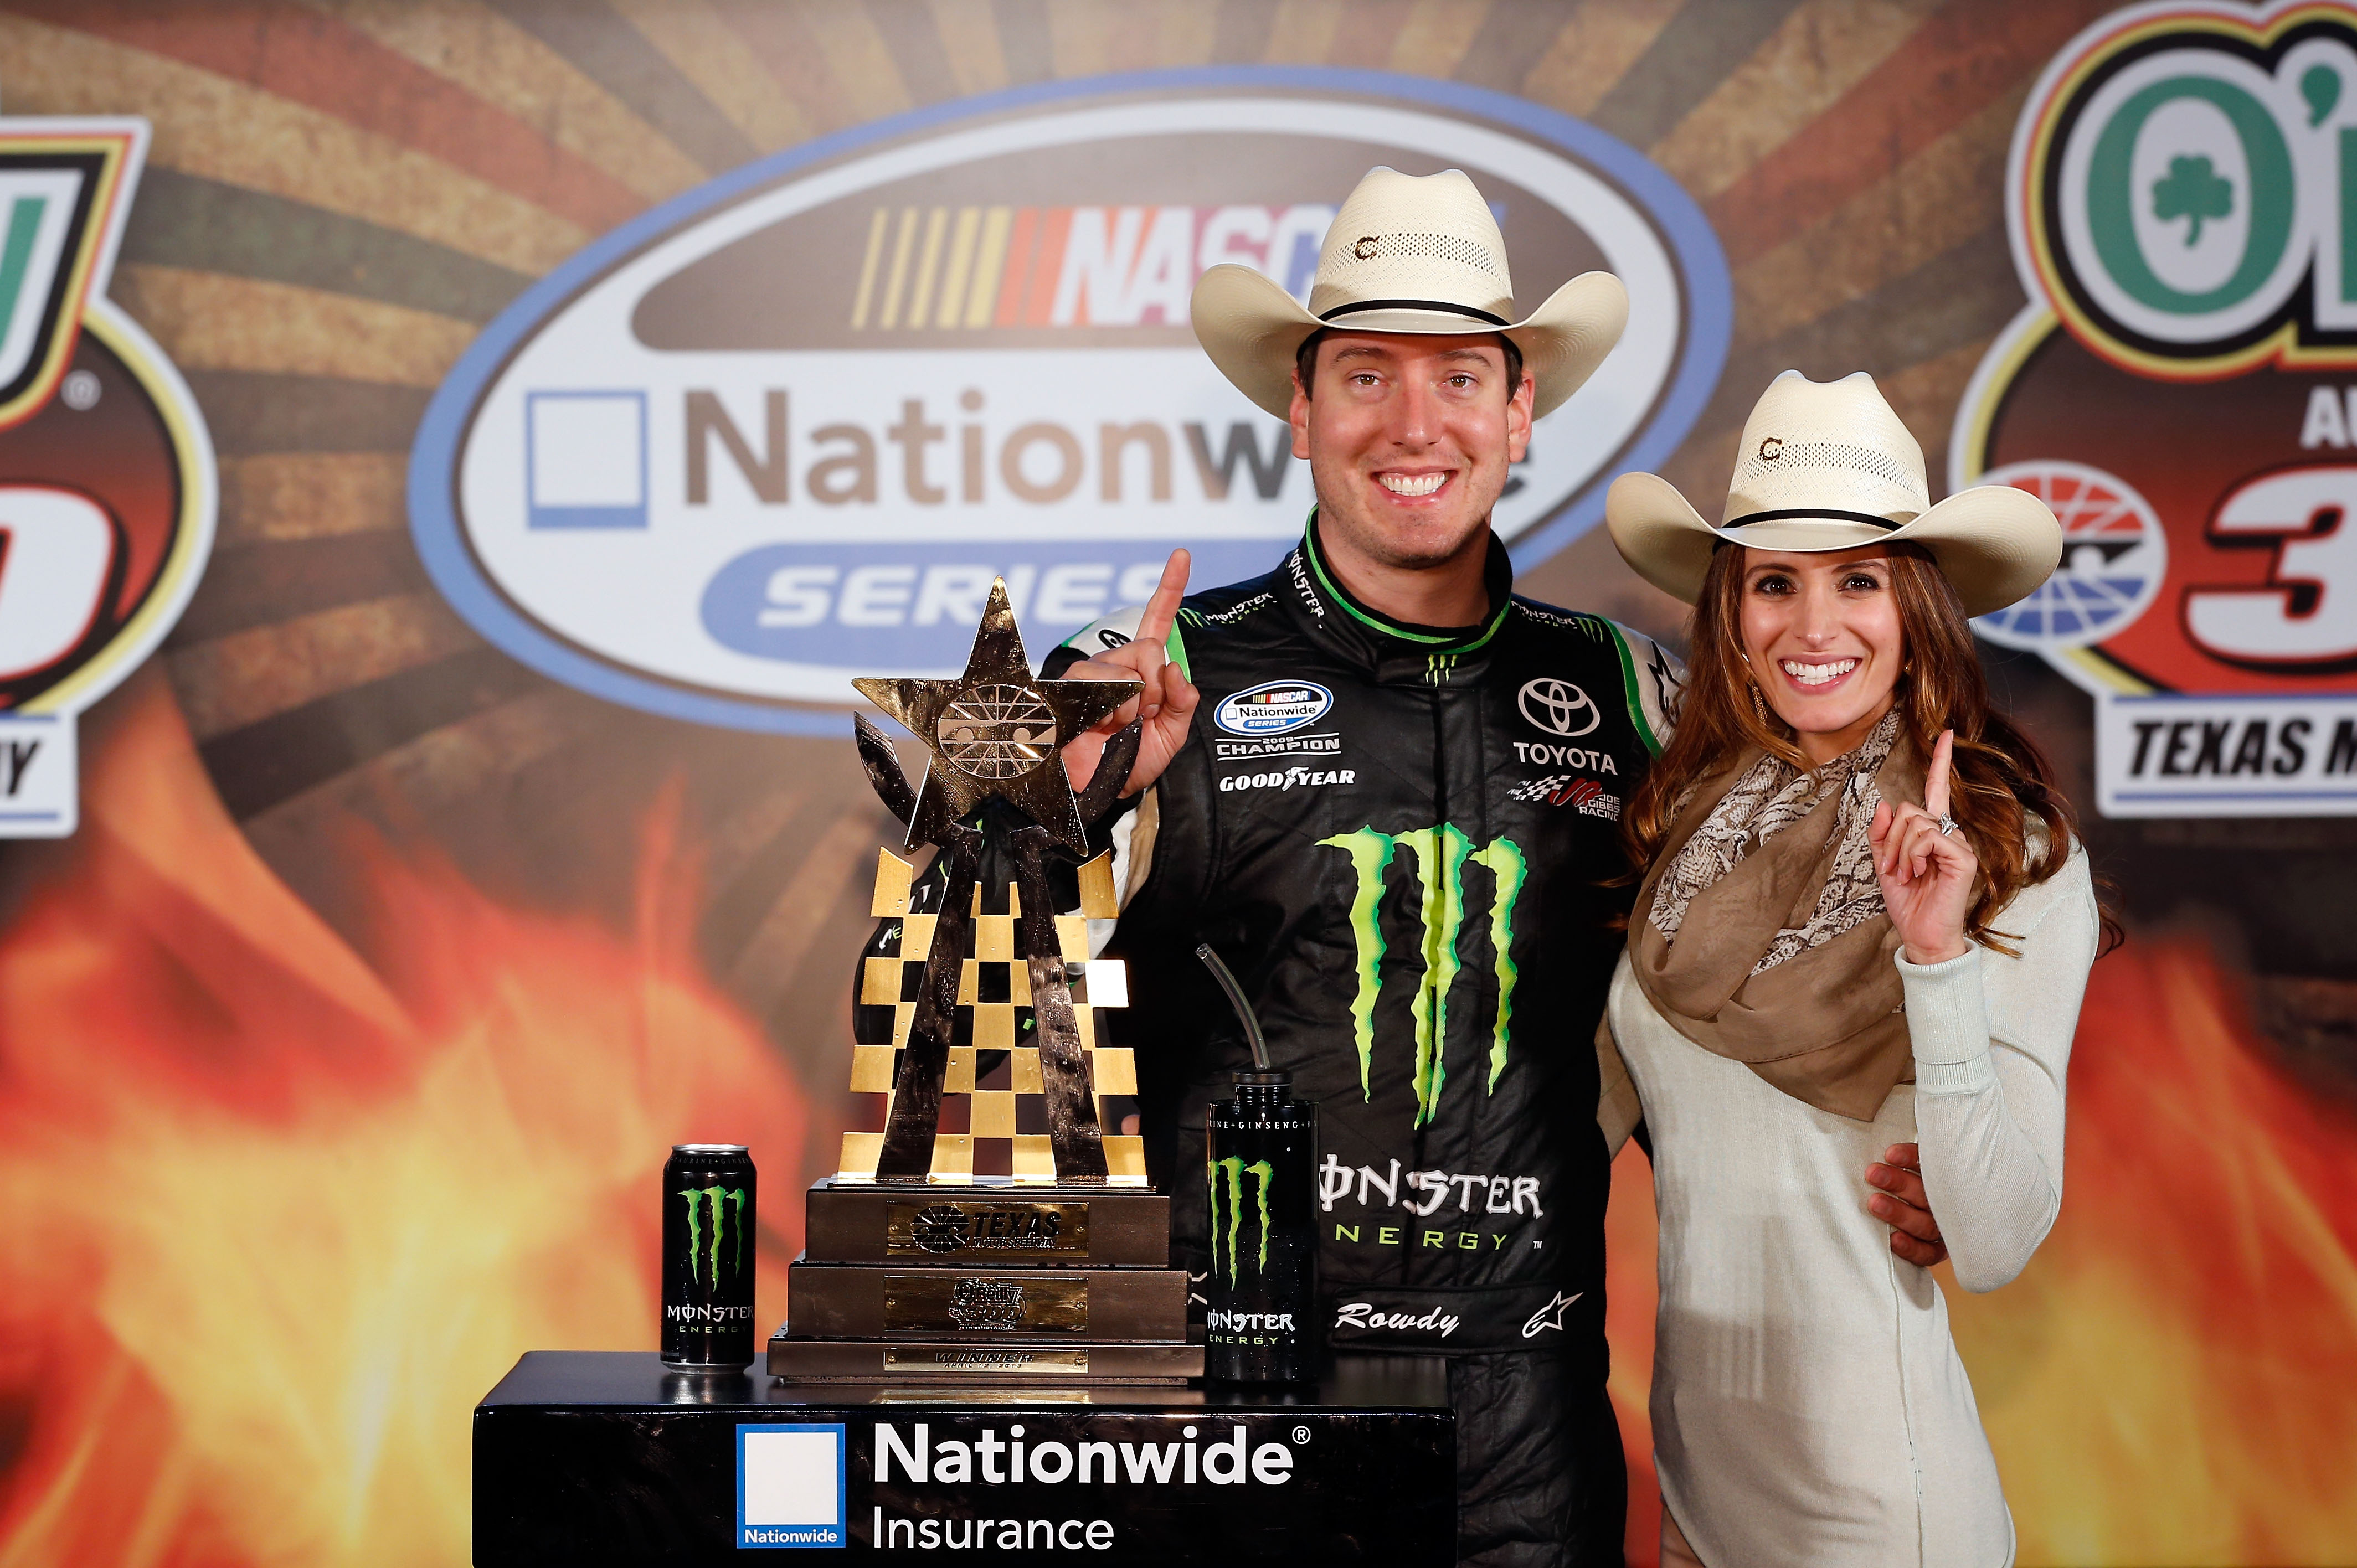 (Photo by Chris Graythen/Getty Images for Texas Motor Speedway)